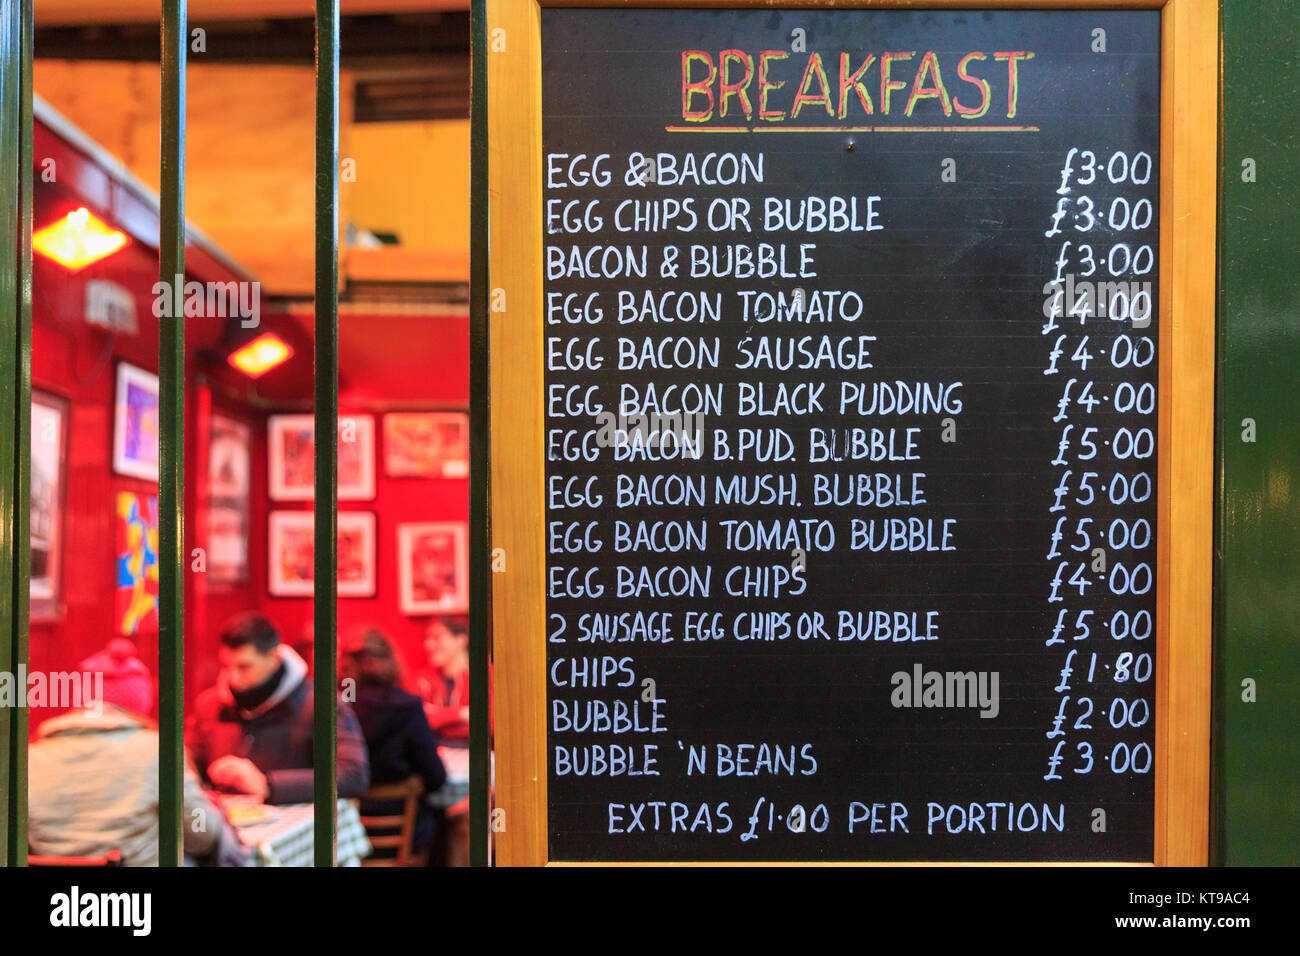 Full English breakfast dishes displayed on a menu in a market cafe Stock Photo